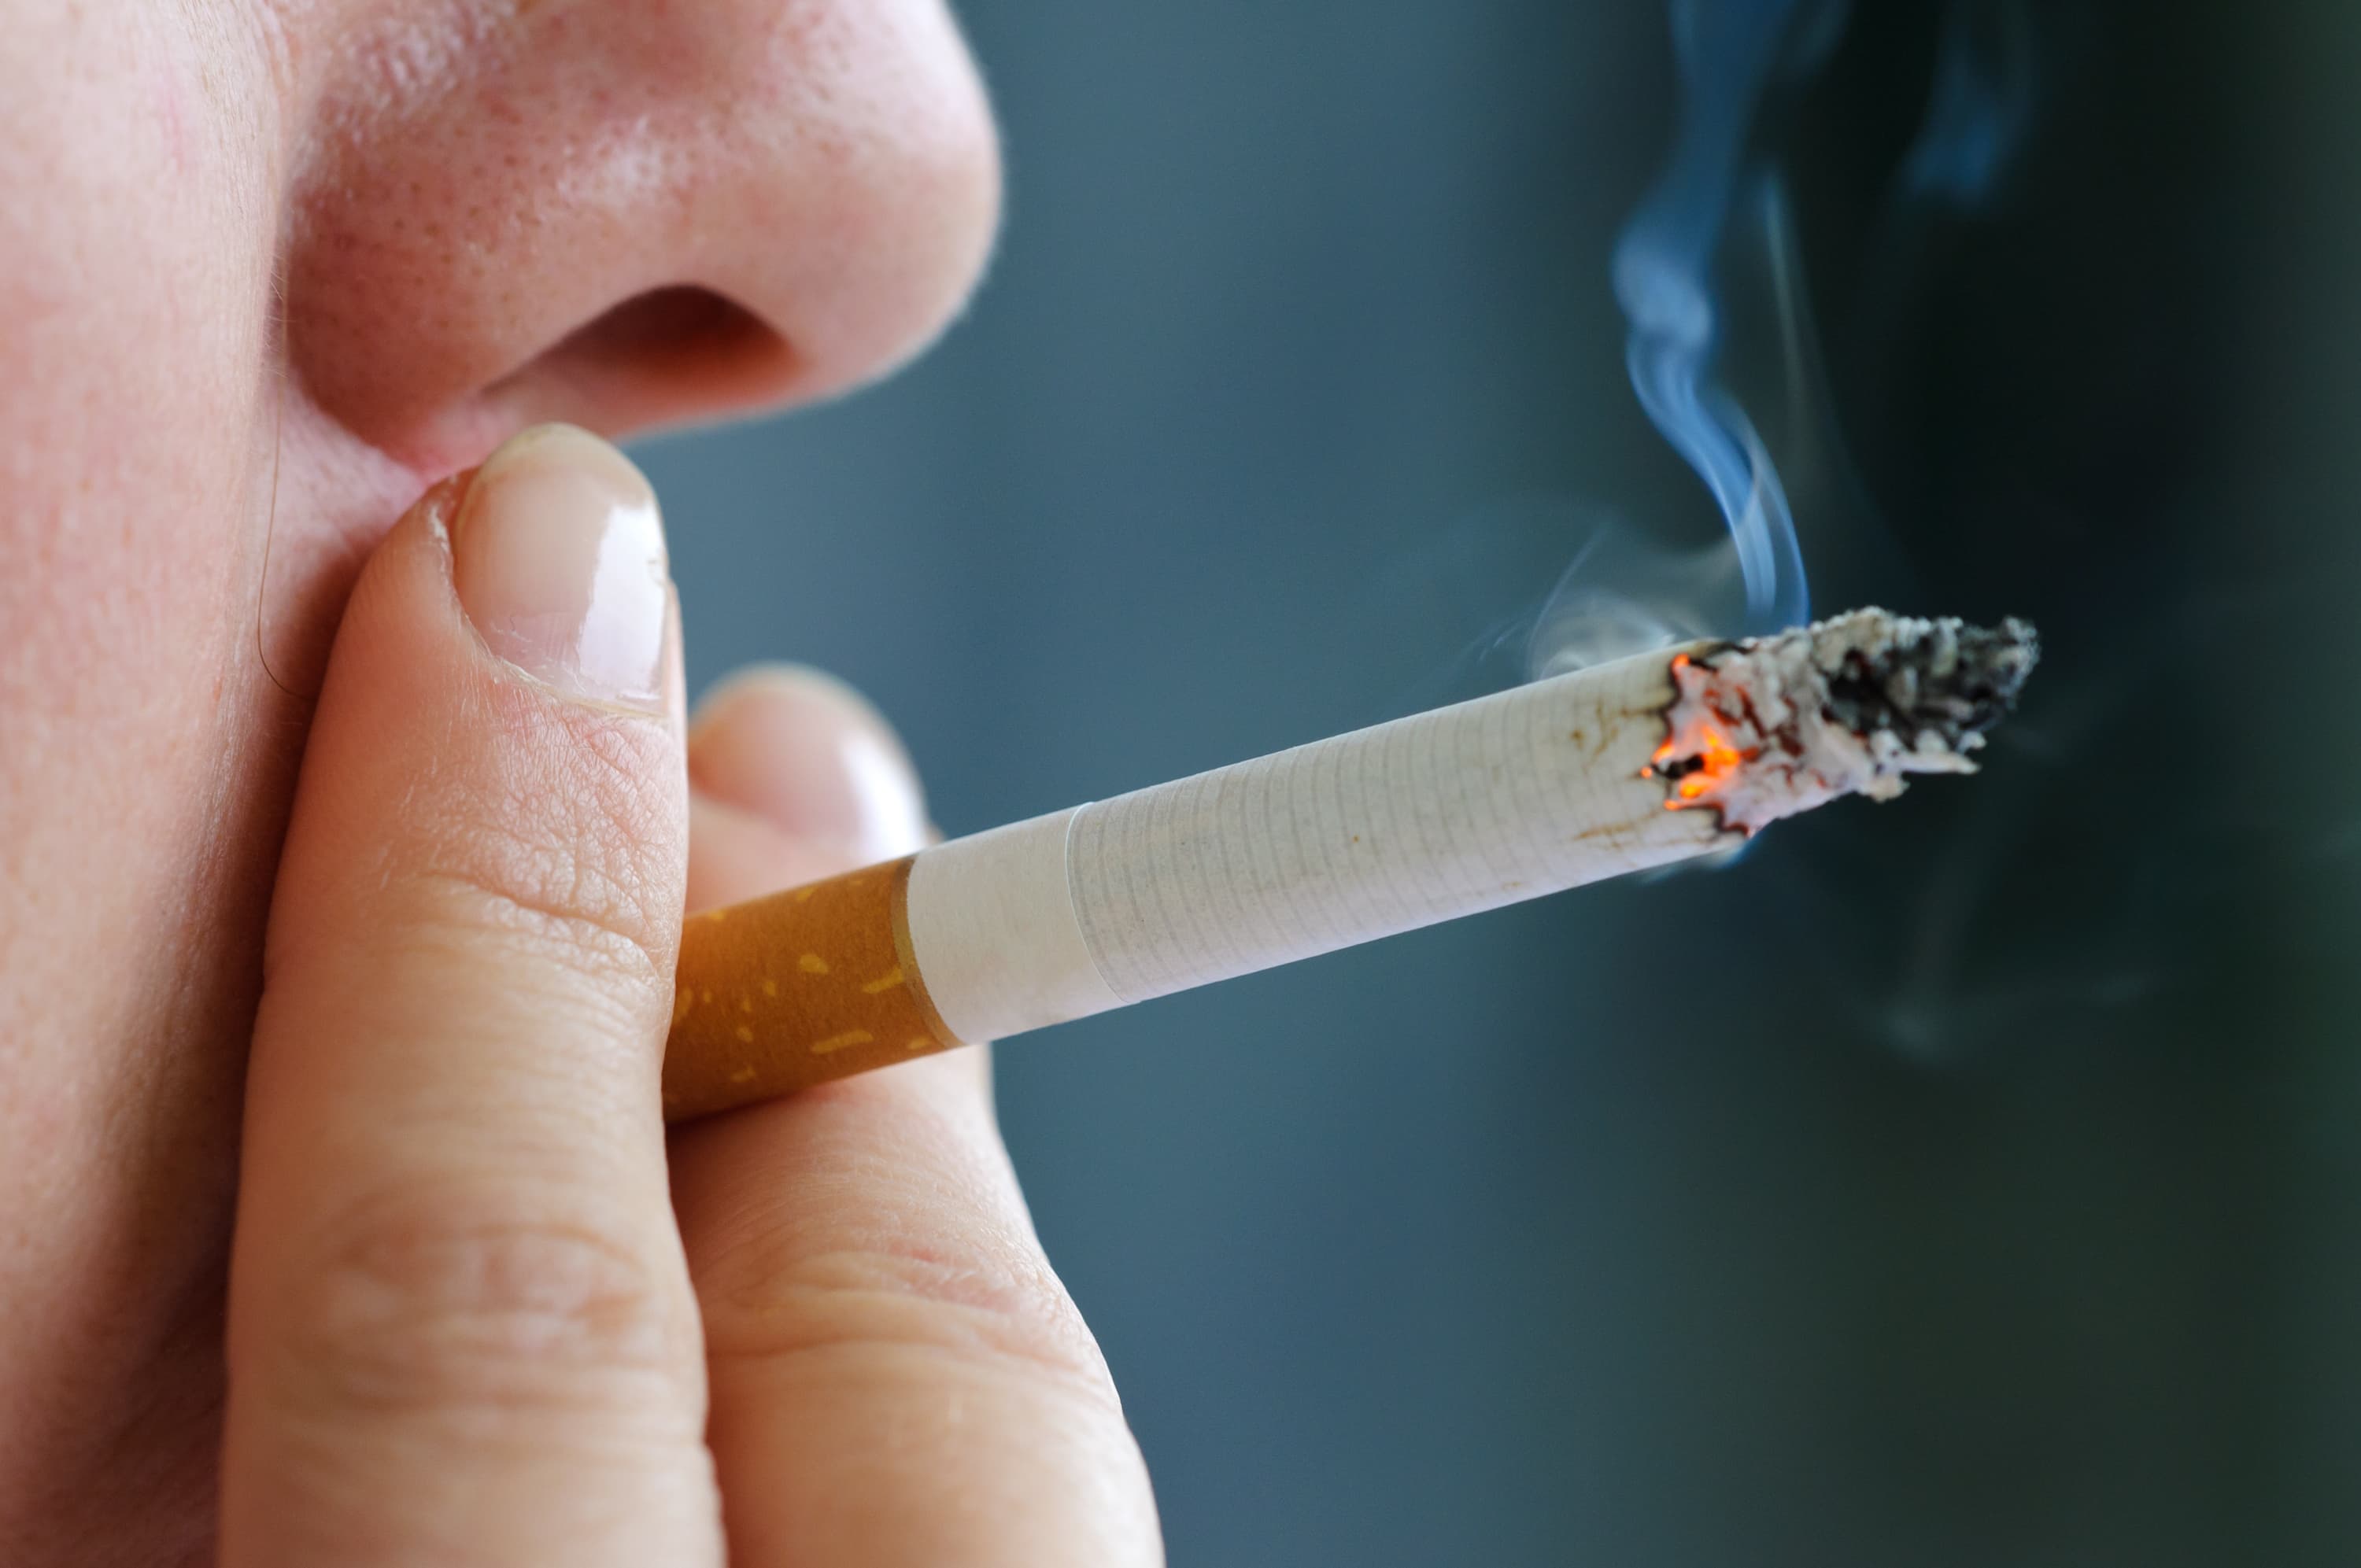 Marlboro maker Altria says it wants to move away from cigarettes.